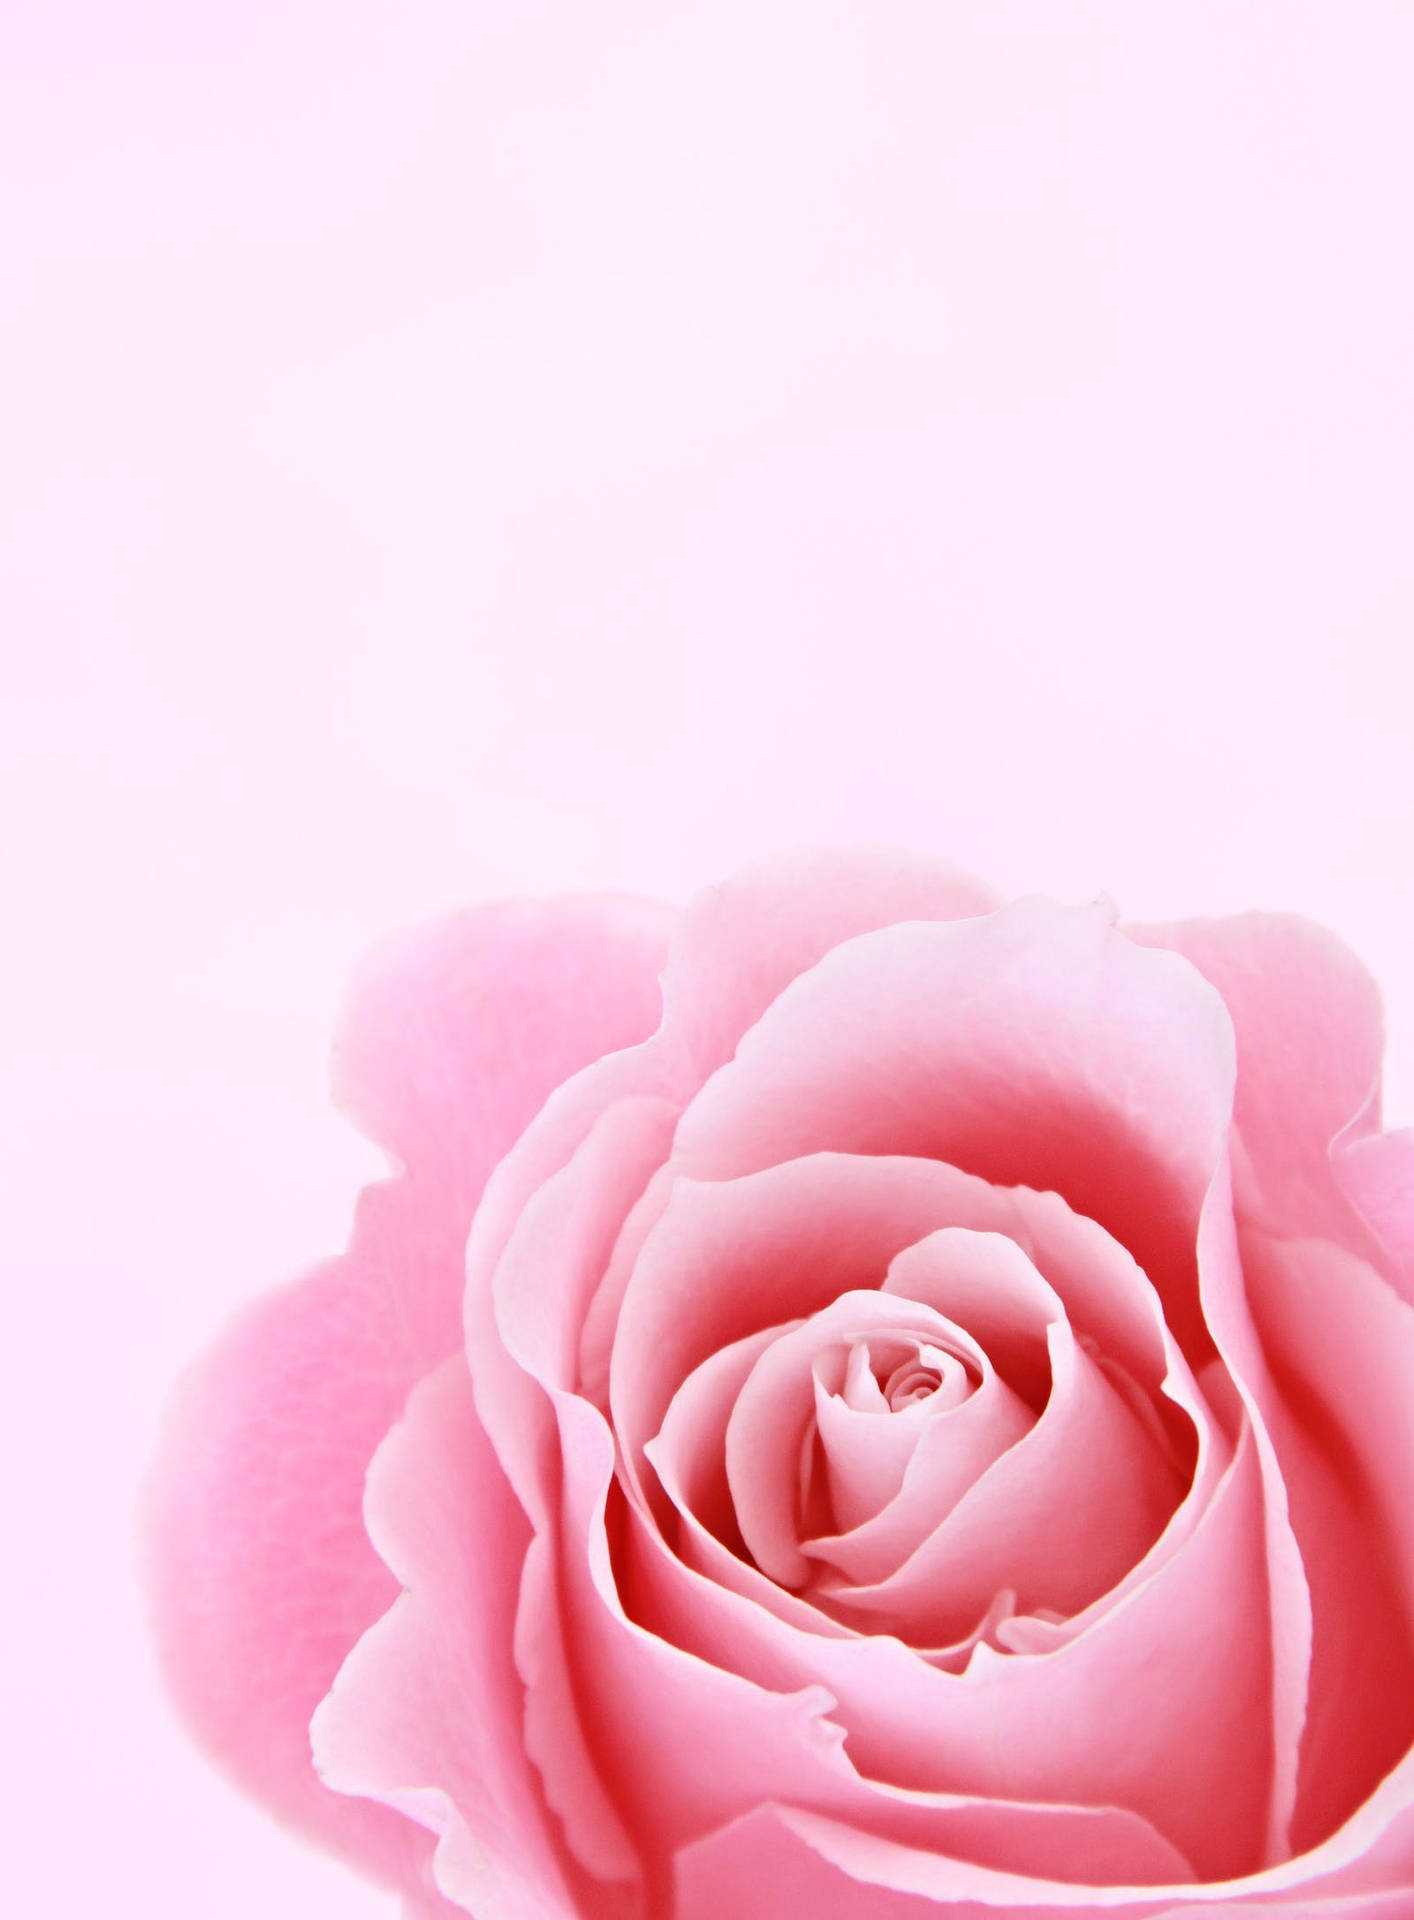 Rose Iphone Background Wallpaper